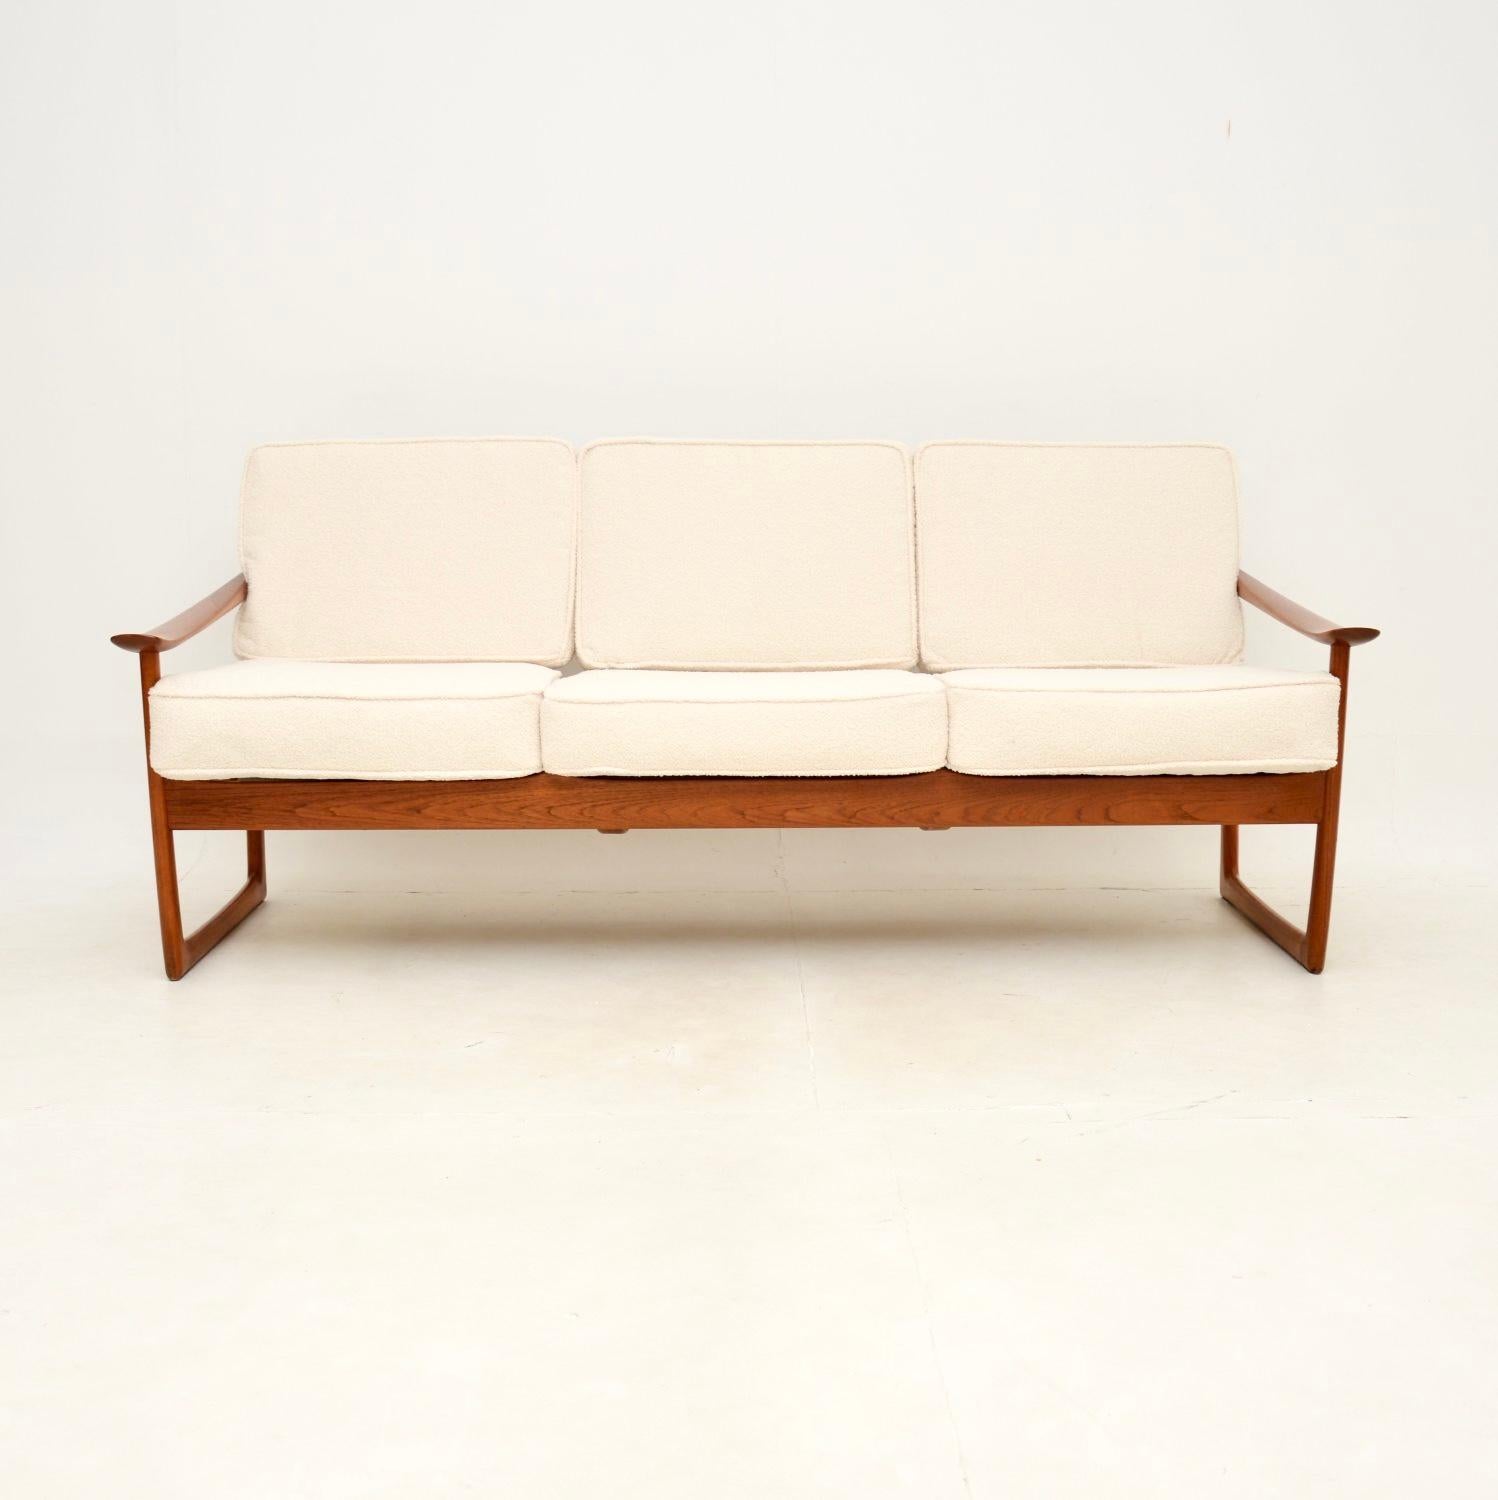 A stunning Danish vintage teak sofa by Peter Hvidt and Orla Molgaard Nielsen. This was made in Denmark by France and Son, it dates from the 1960’s.

The quality is outstanding, this is incredibly well designed, comfortable and stylish. The solid